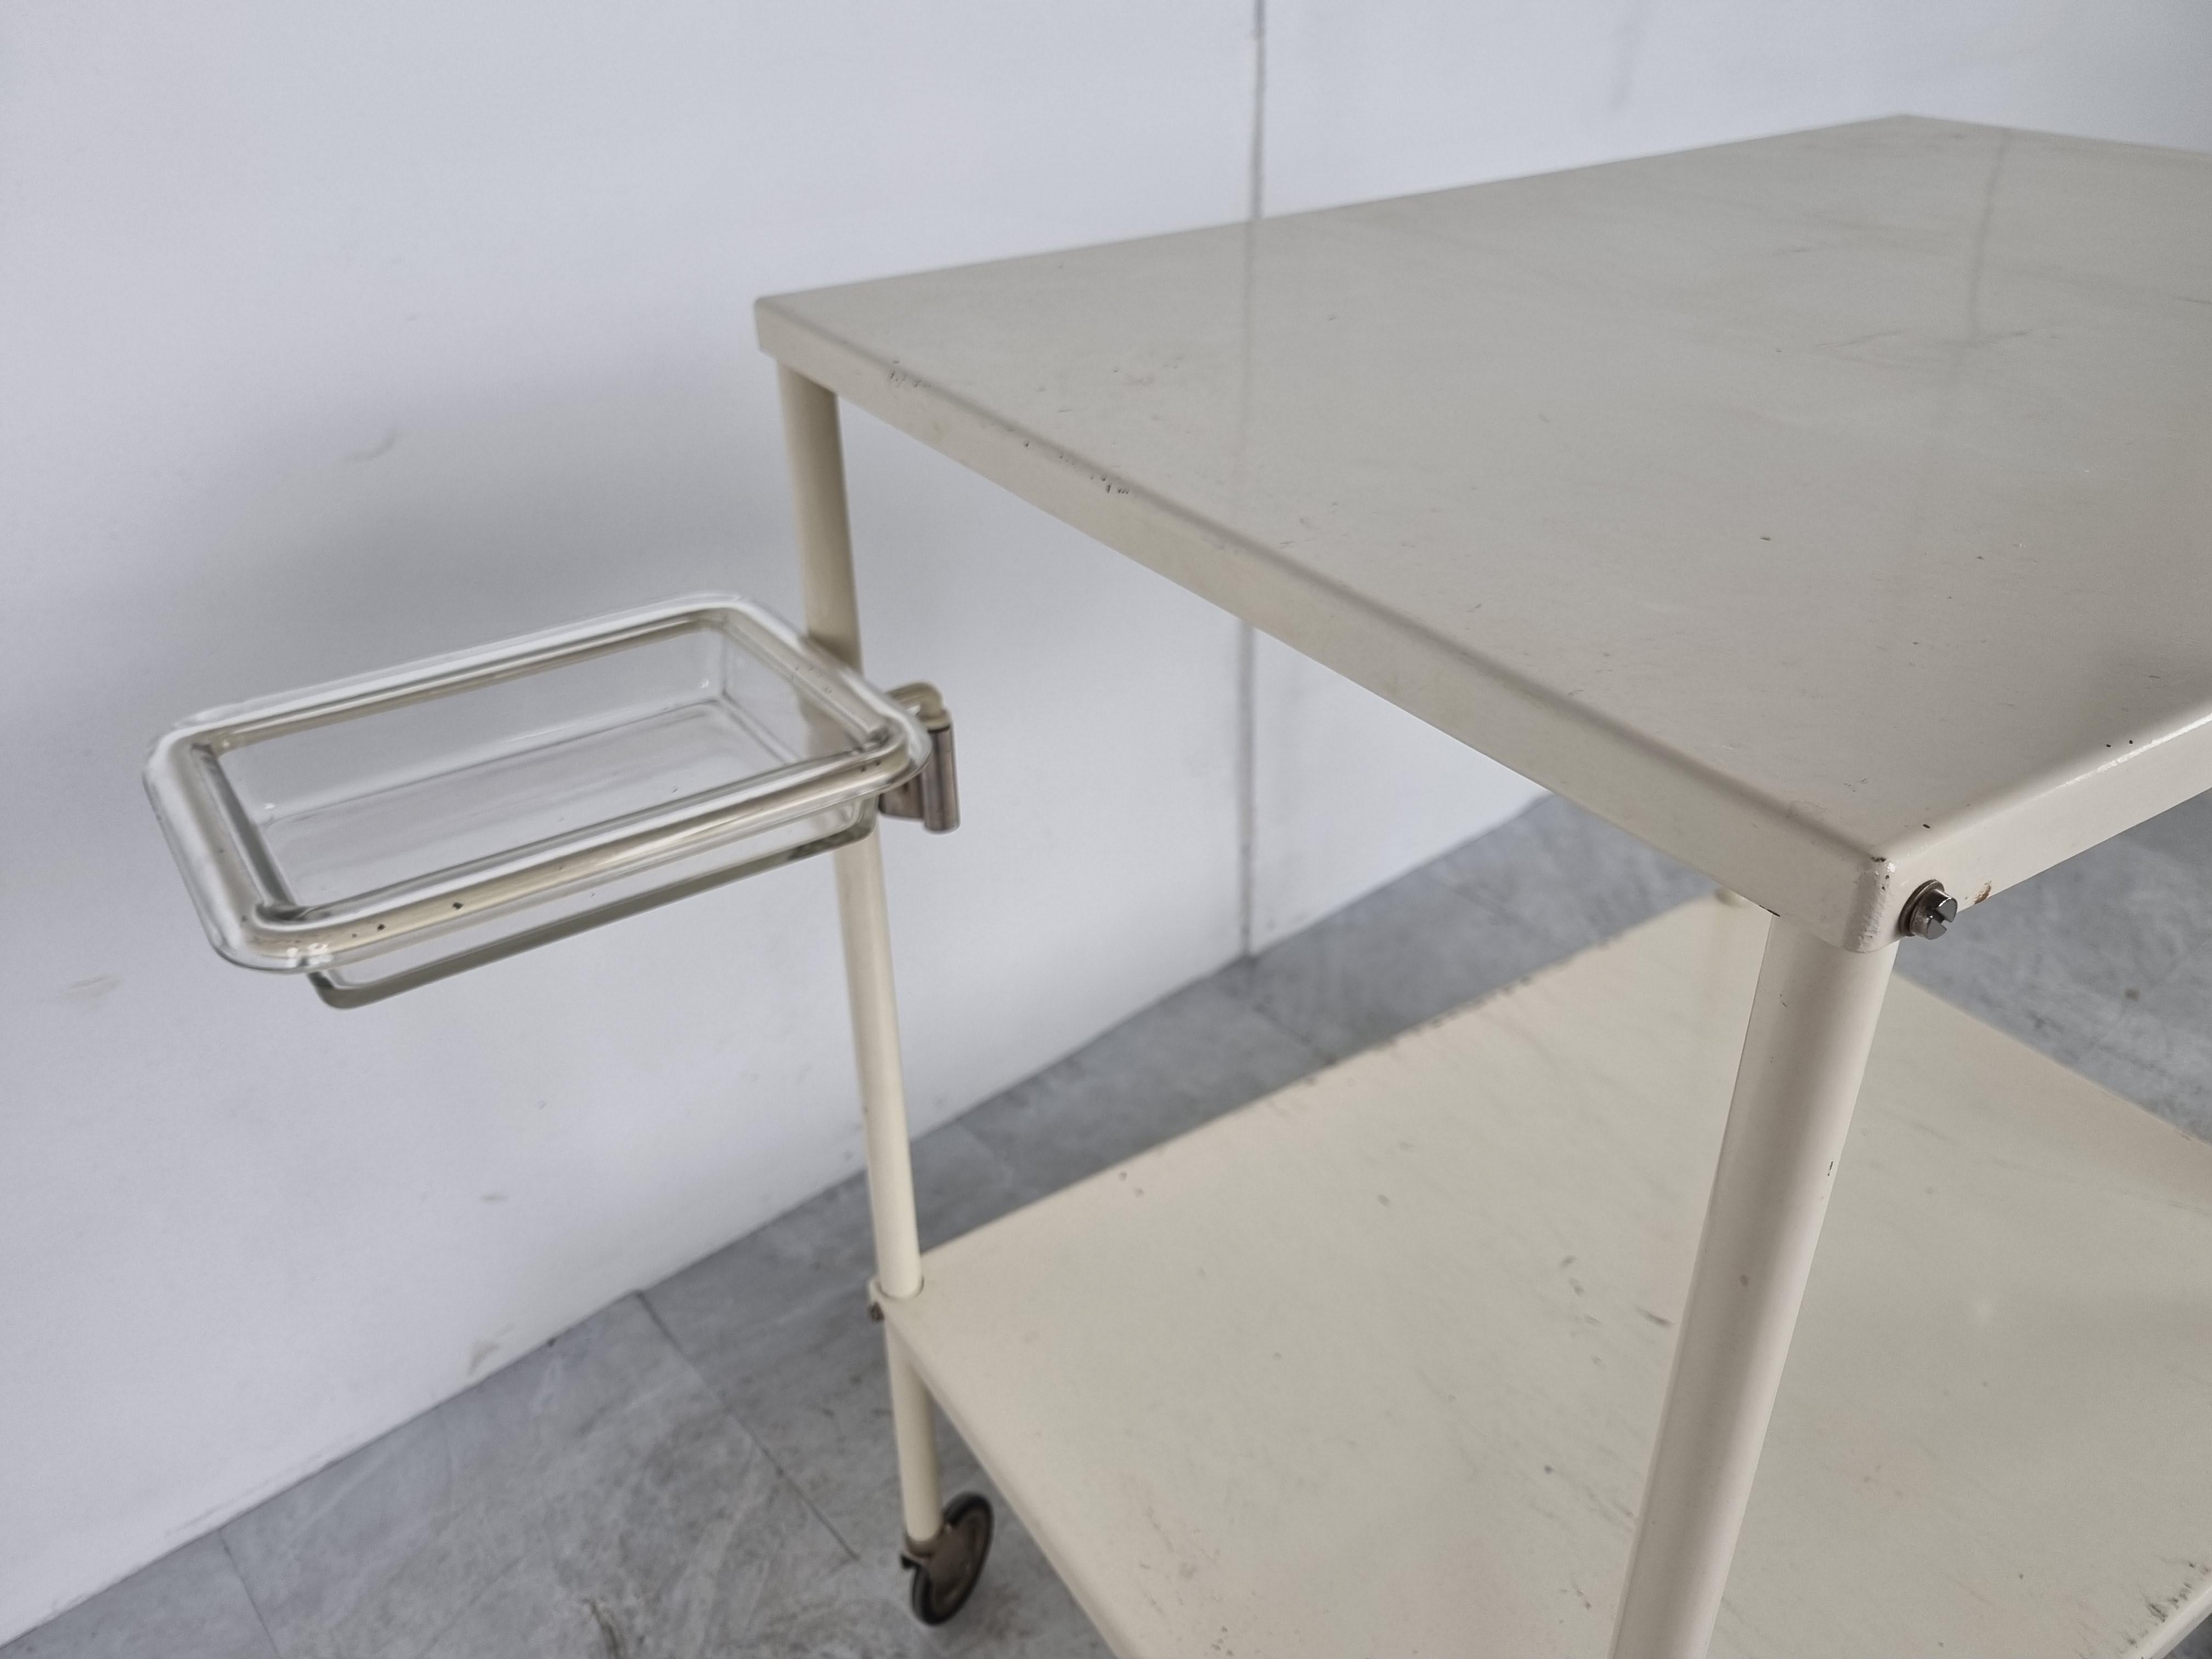 Vintage industrial hospital trolley or side table.

The trolley comes with the two original glass bowls.

This handy trolley was used by nurses to assist a patient during a hospital treatment or operation. It could carry instruments as well as